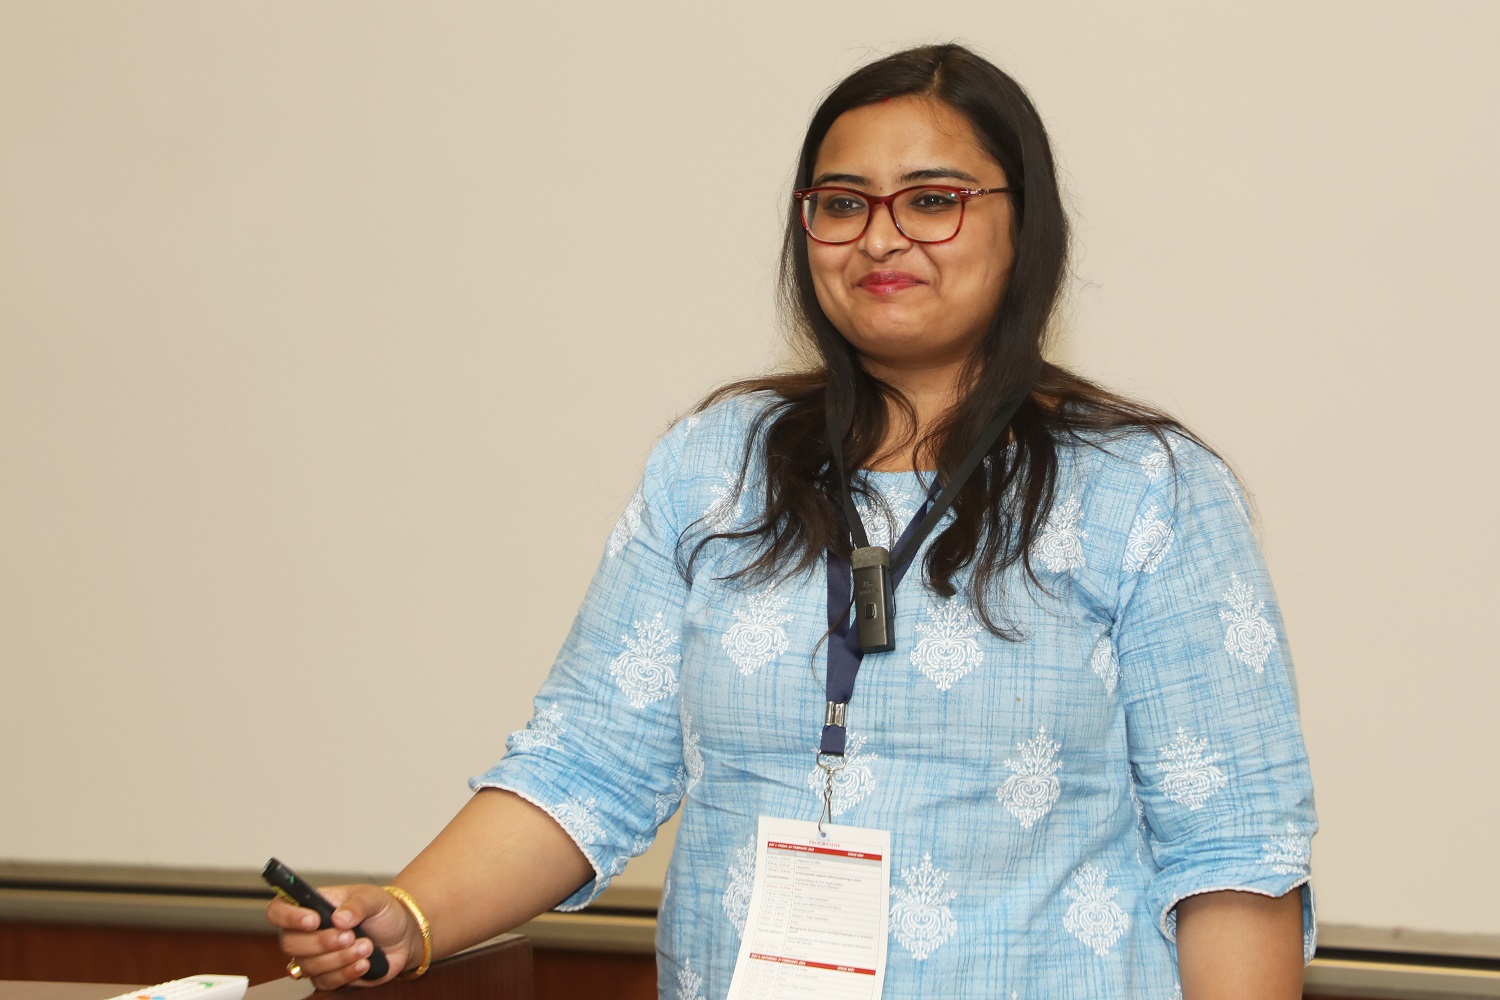 Debanjana Deb Biswas, ICFAI Business School, Telangana, presents her paper titled, ‘From adversity to adaptation: Exploring the factors that build resilience at work’, at the IMR Doctoral Conference, at IIMB on 2nd February 2024.